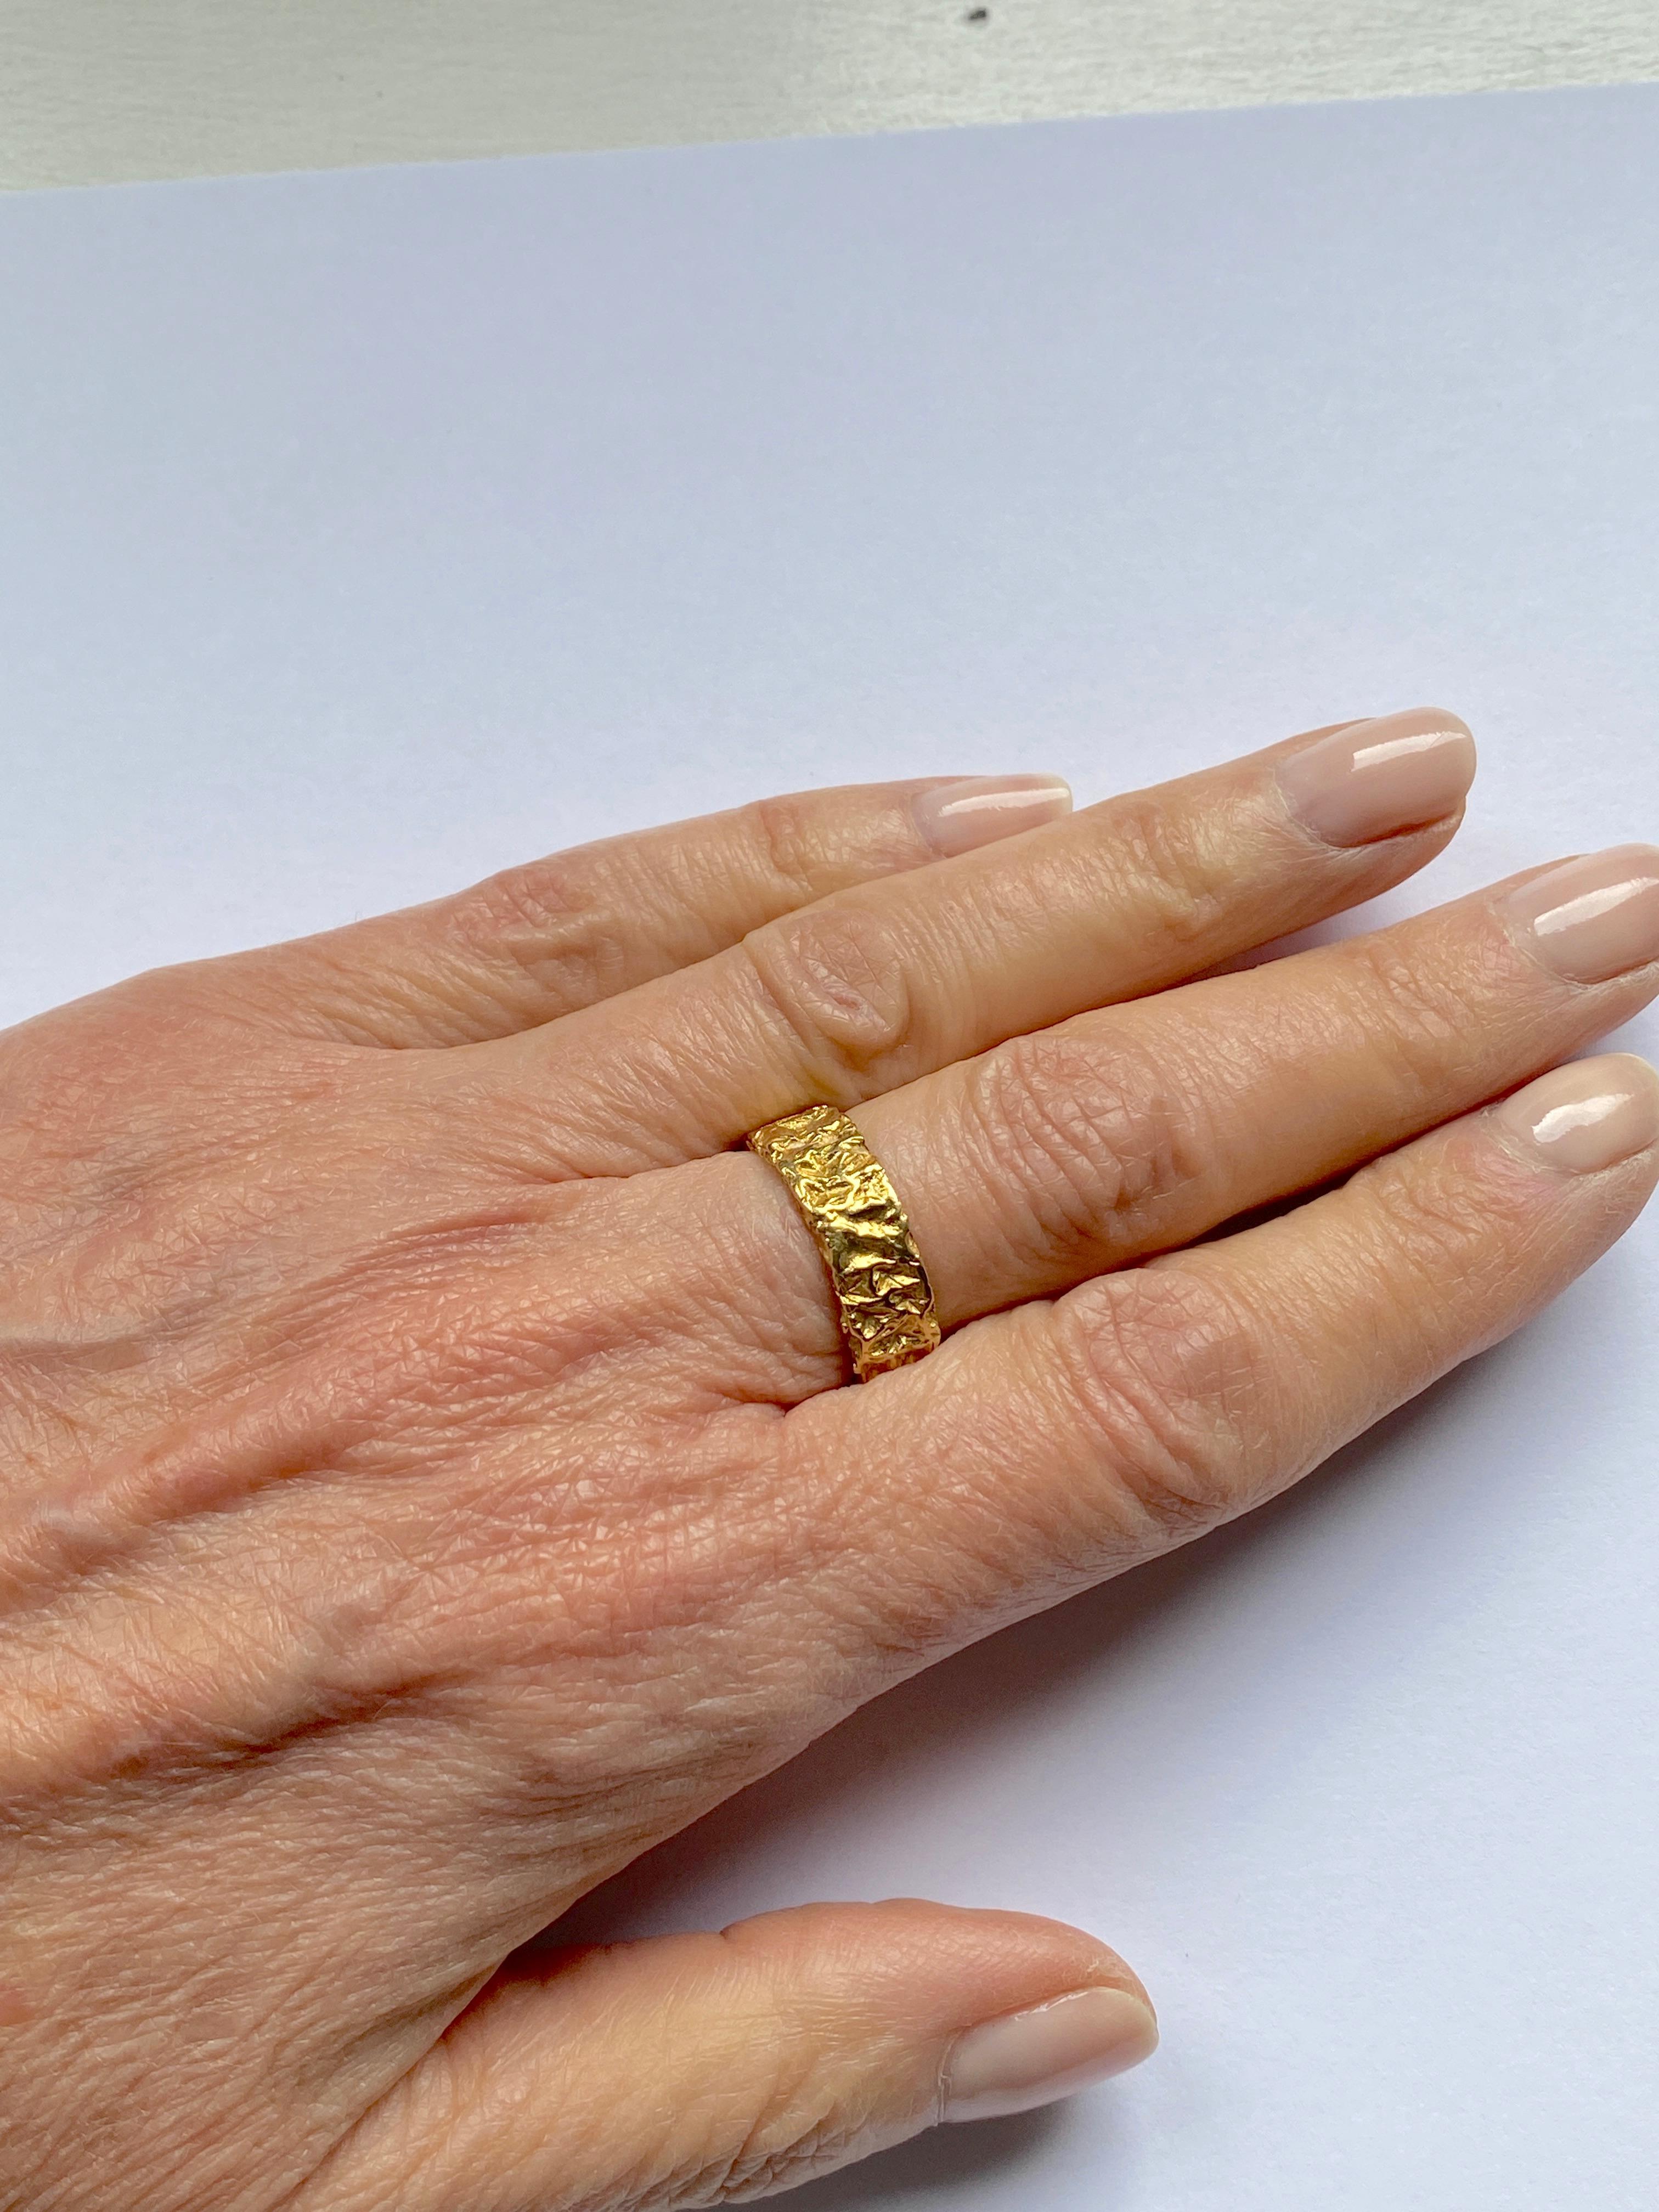 Introducing Rossella Ugolini's Exquisite 18 Karat Yellow Gold Band Ring: A Unique Handcrafted Masterpiece from Italy.
Available now Size Usa 6,5 every size is available in three weeks.
This one-of-a-kind band ring is meticulously crafted by skilled